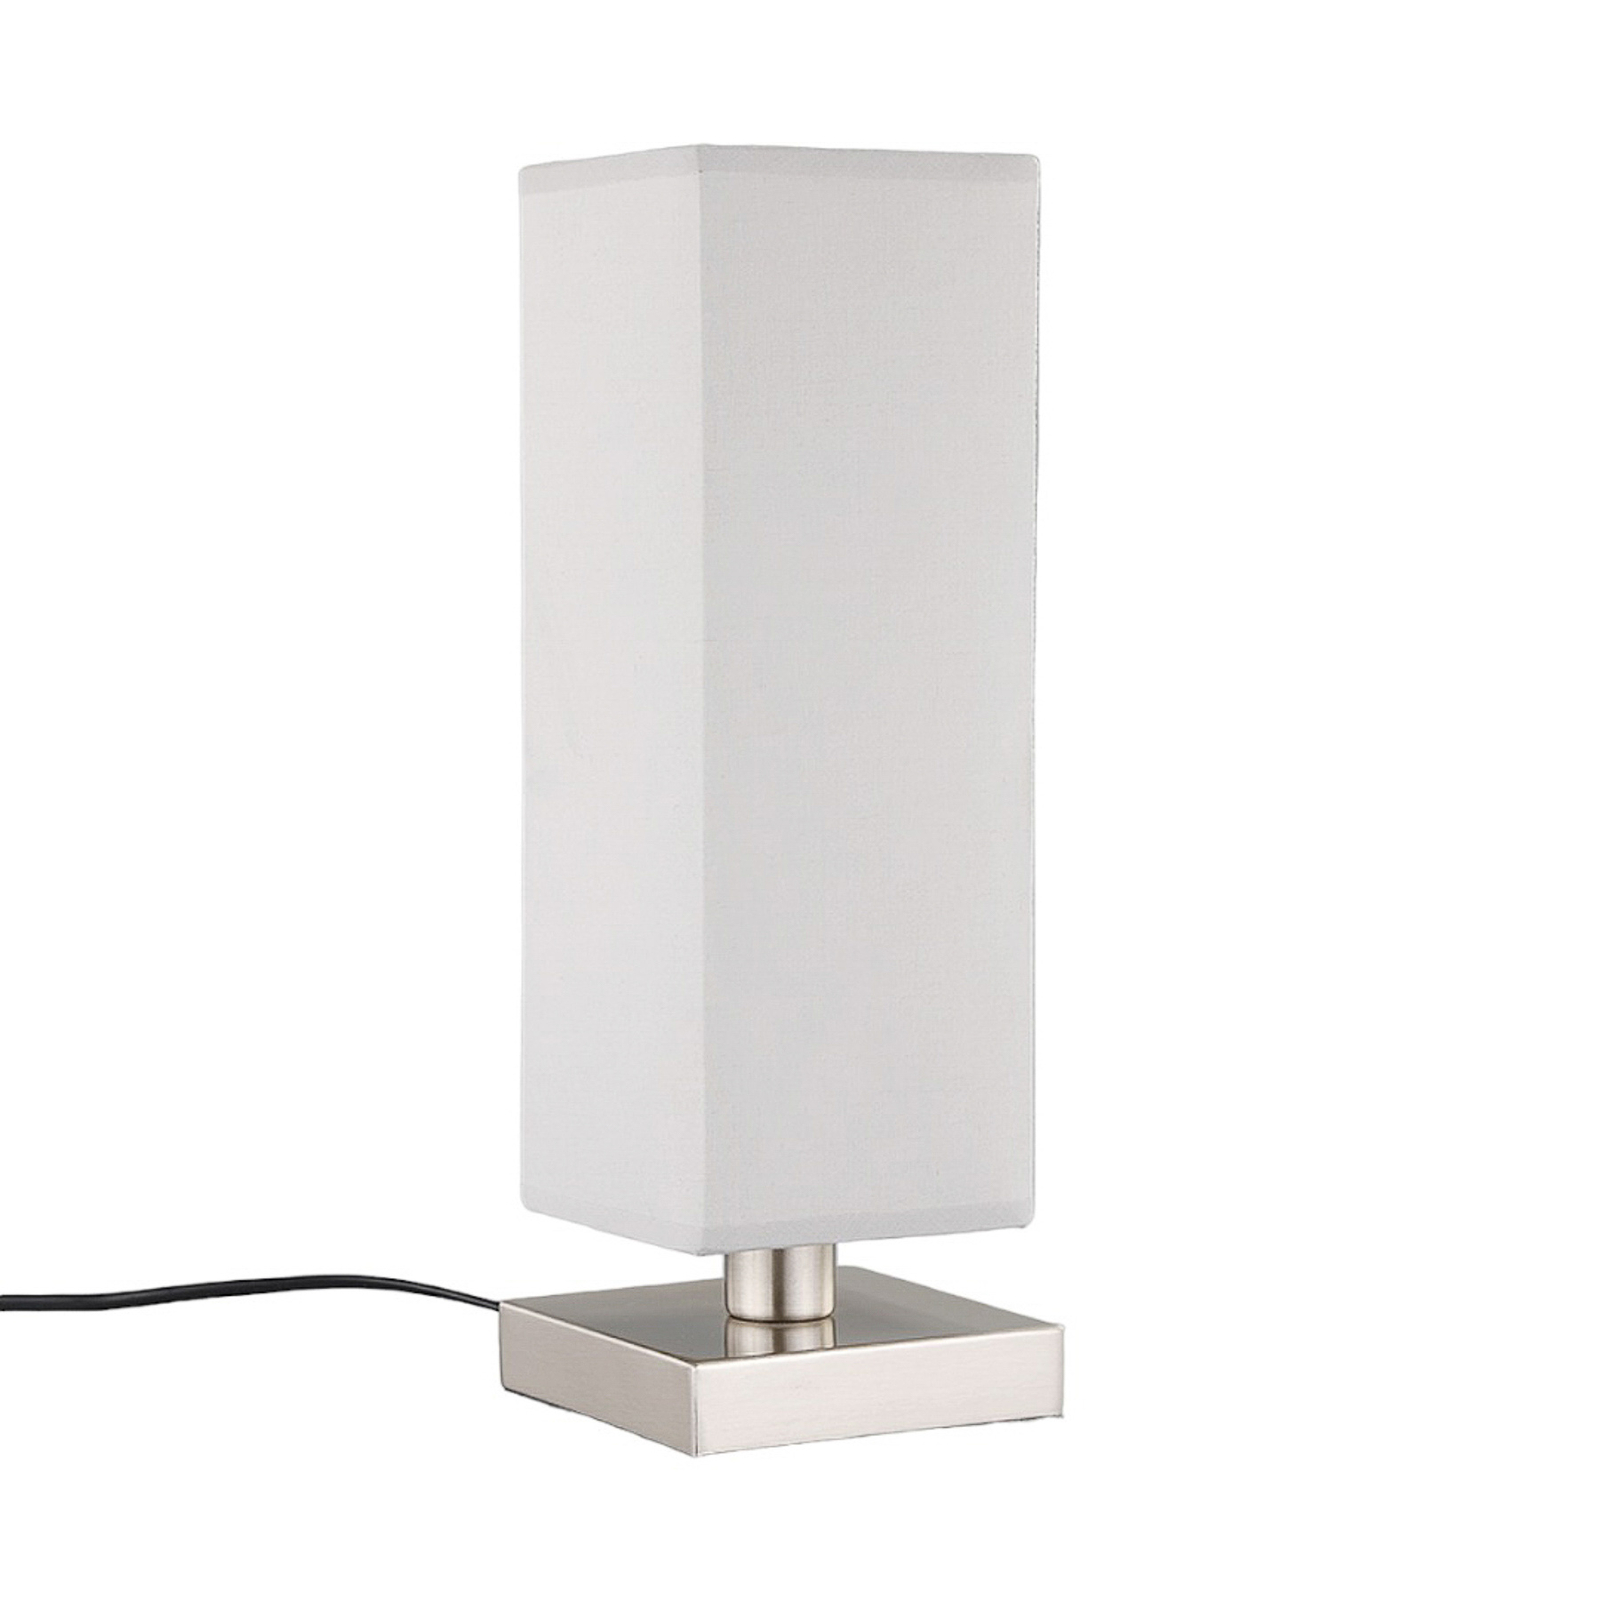 Julina - fabric bedside table lamp in light grey